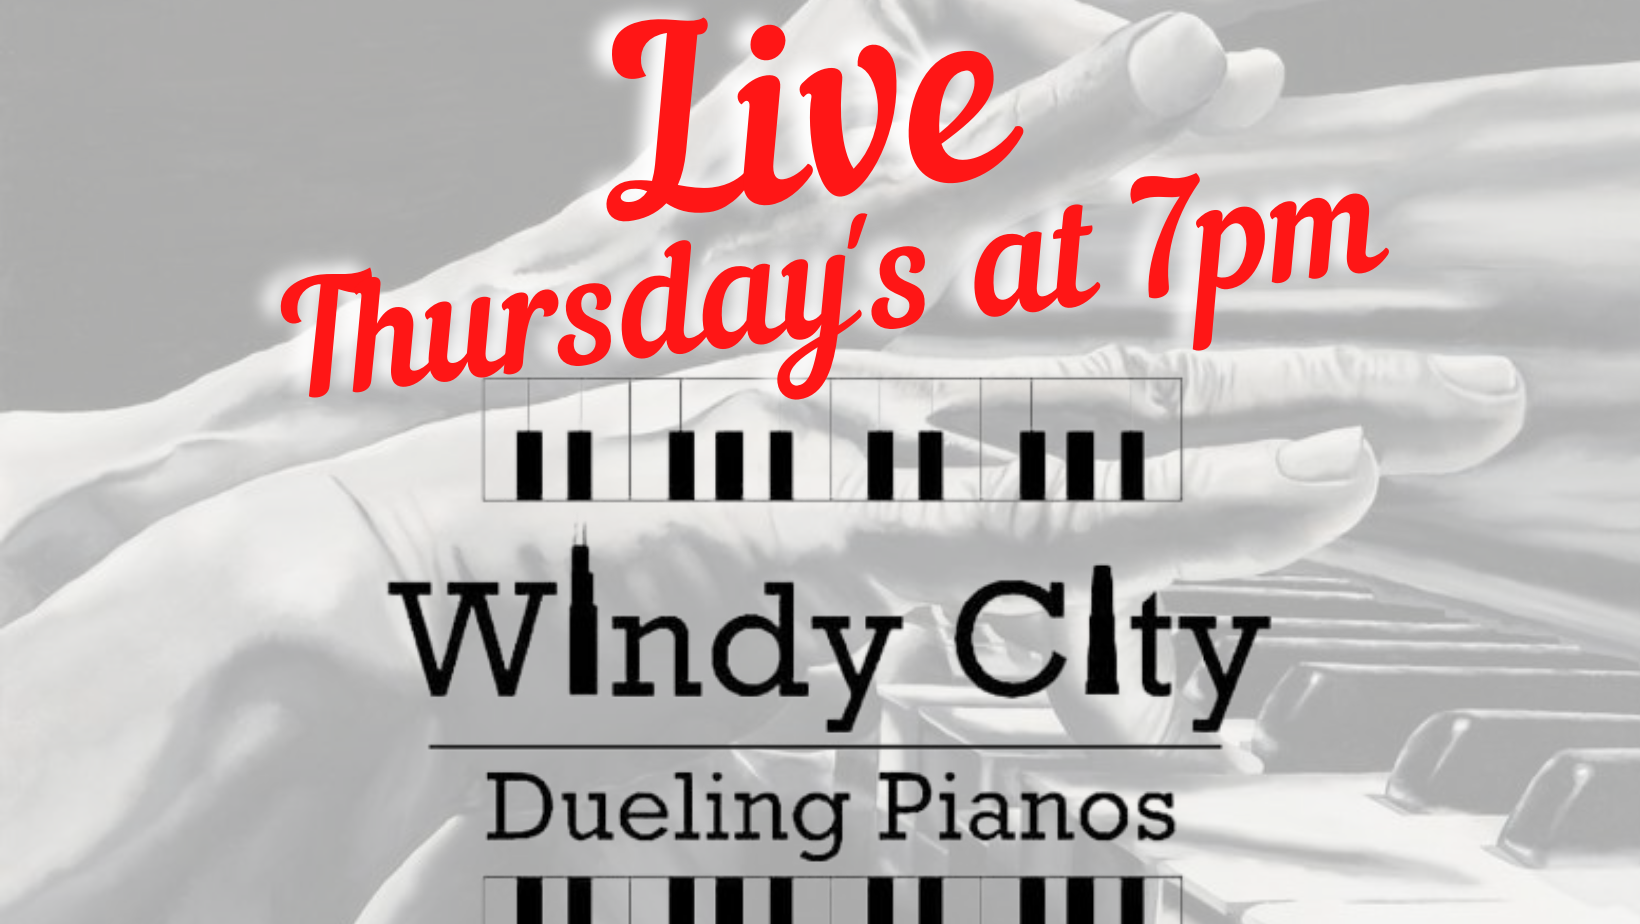 You are currently viewing WINDY CITY DUELING PIANOS at Village Roadhouse – Thursdays